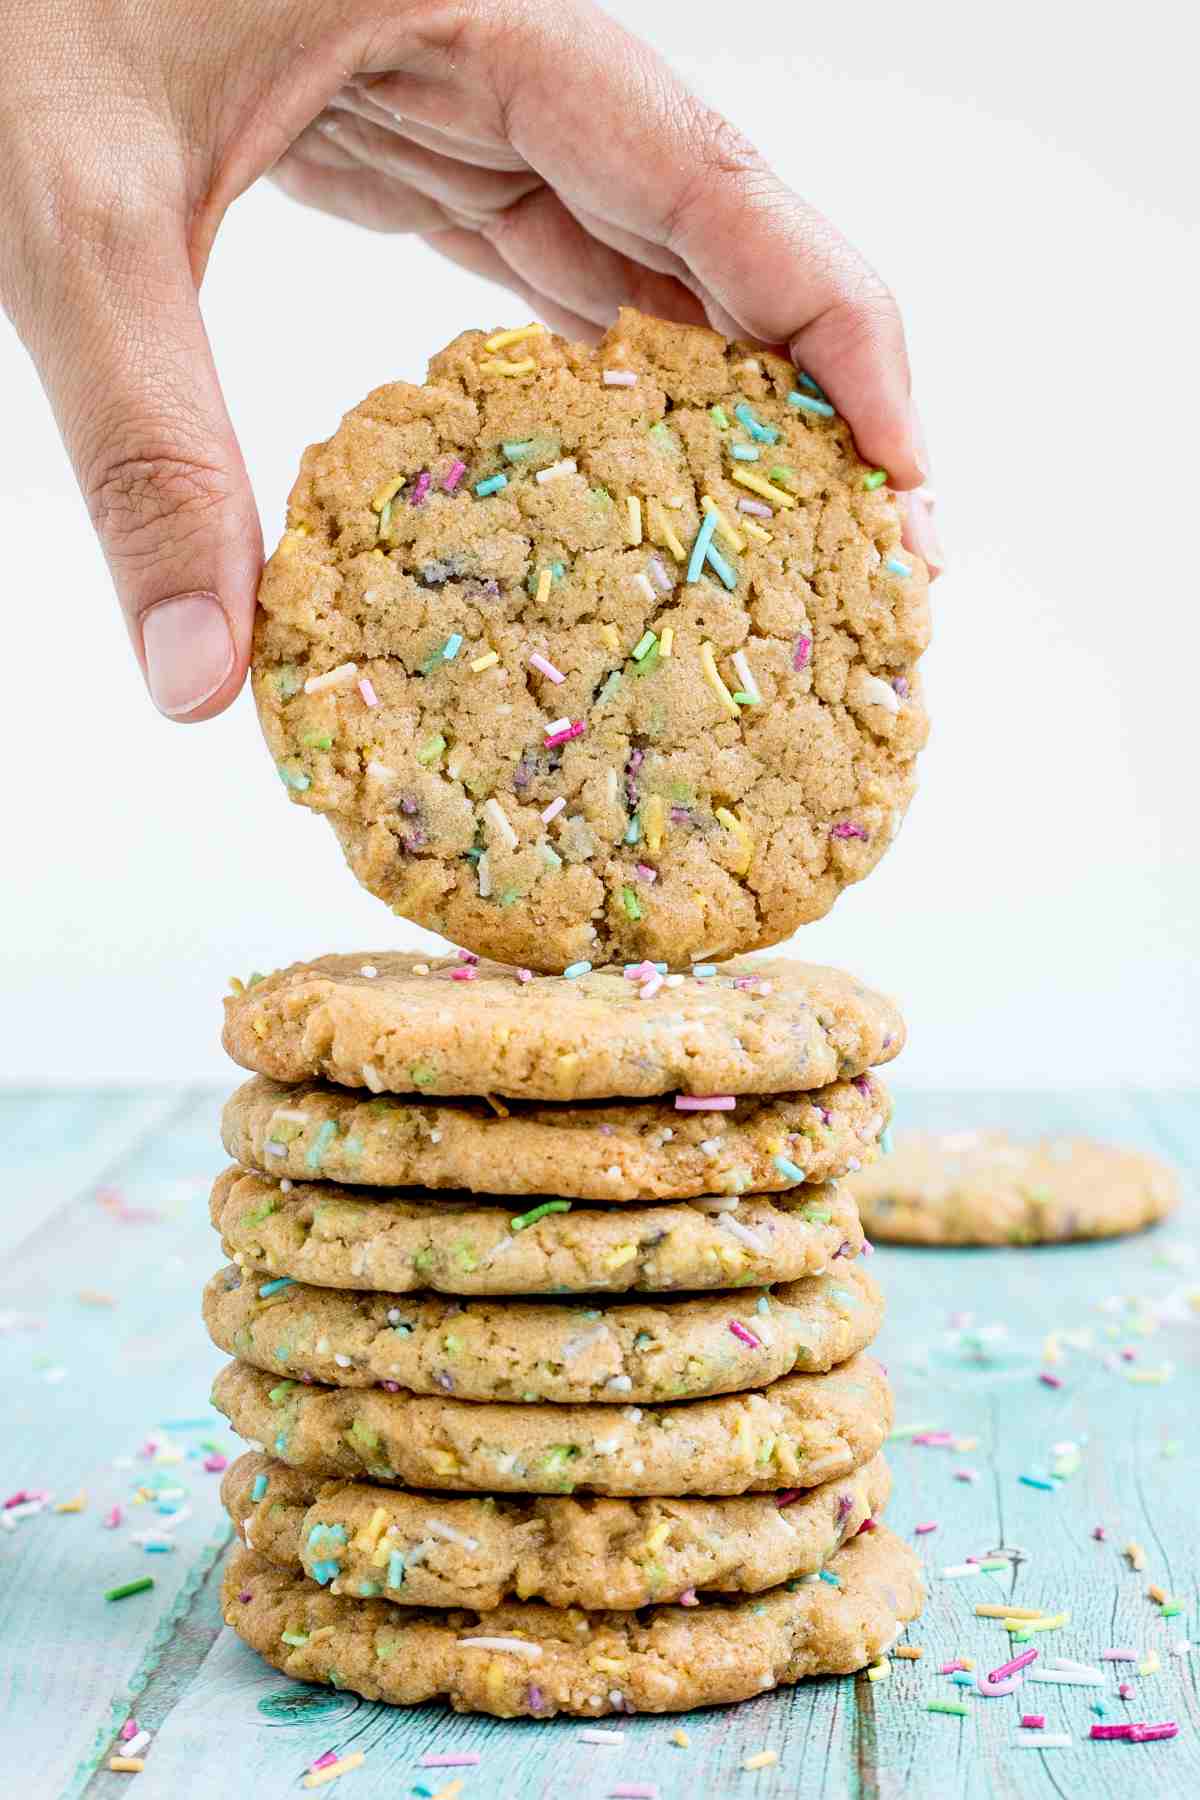 A stack of light brown cookies with rainbow sprinkles on a blue wooden surface. A hand is taking one from the top.